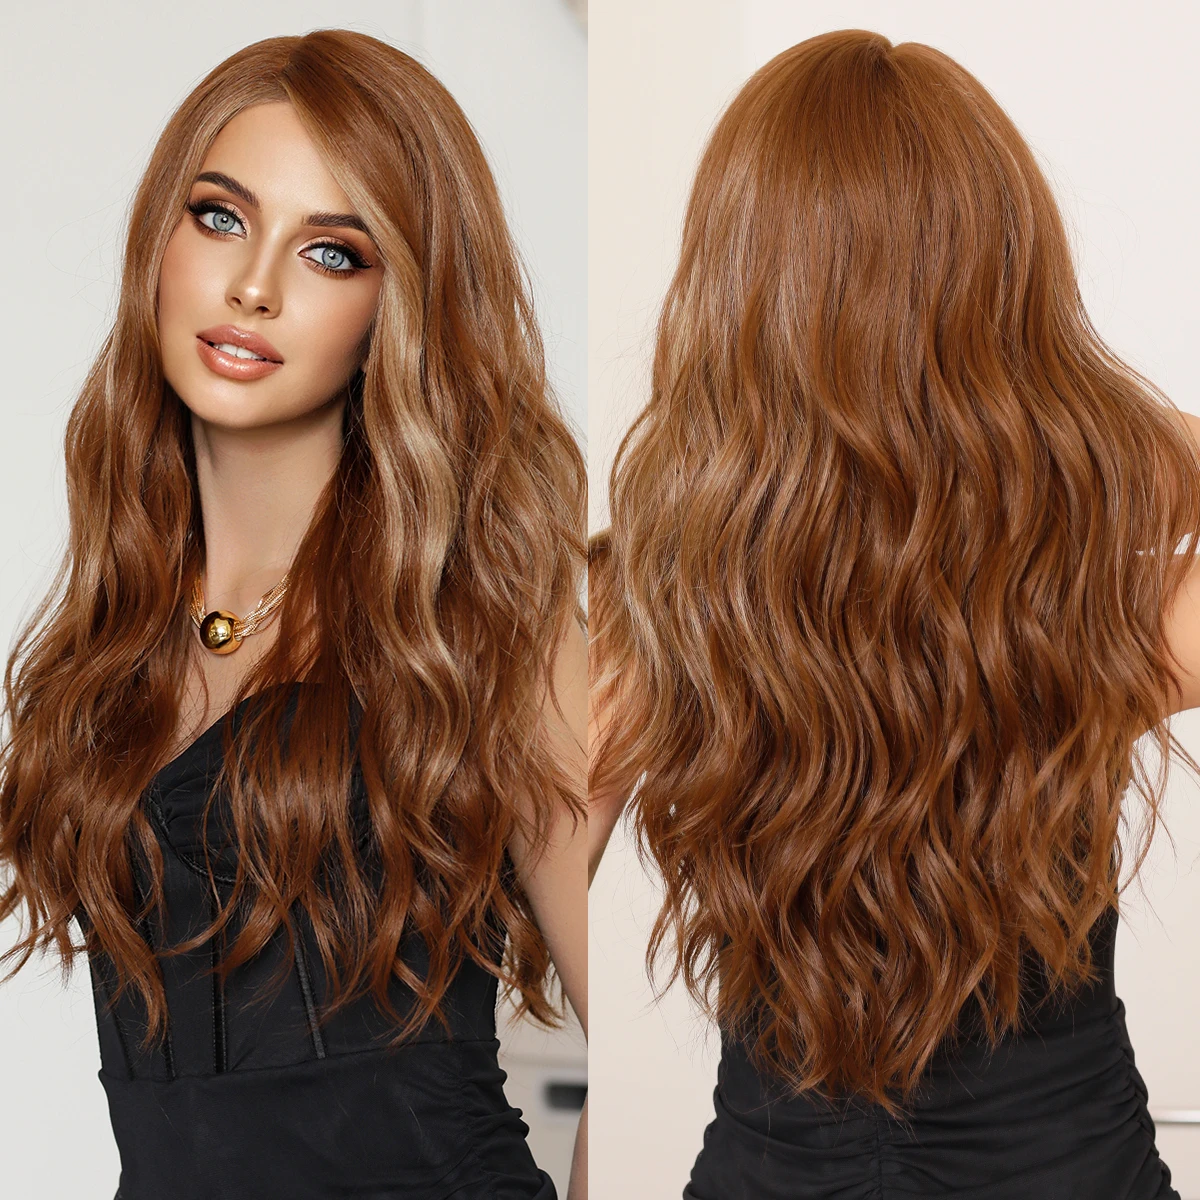 

Highlights Honey Blonde Lace Front Wigs Long Wavy Wigs for Women Curly Side Part Blonde Hair Natural Looking Synthetic Hair Wigs